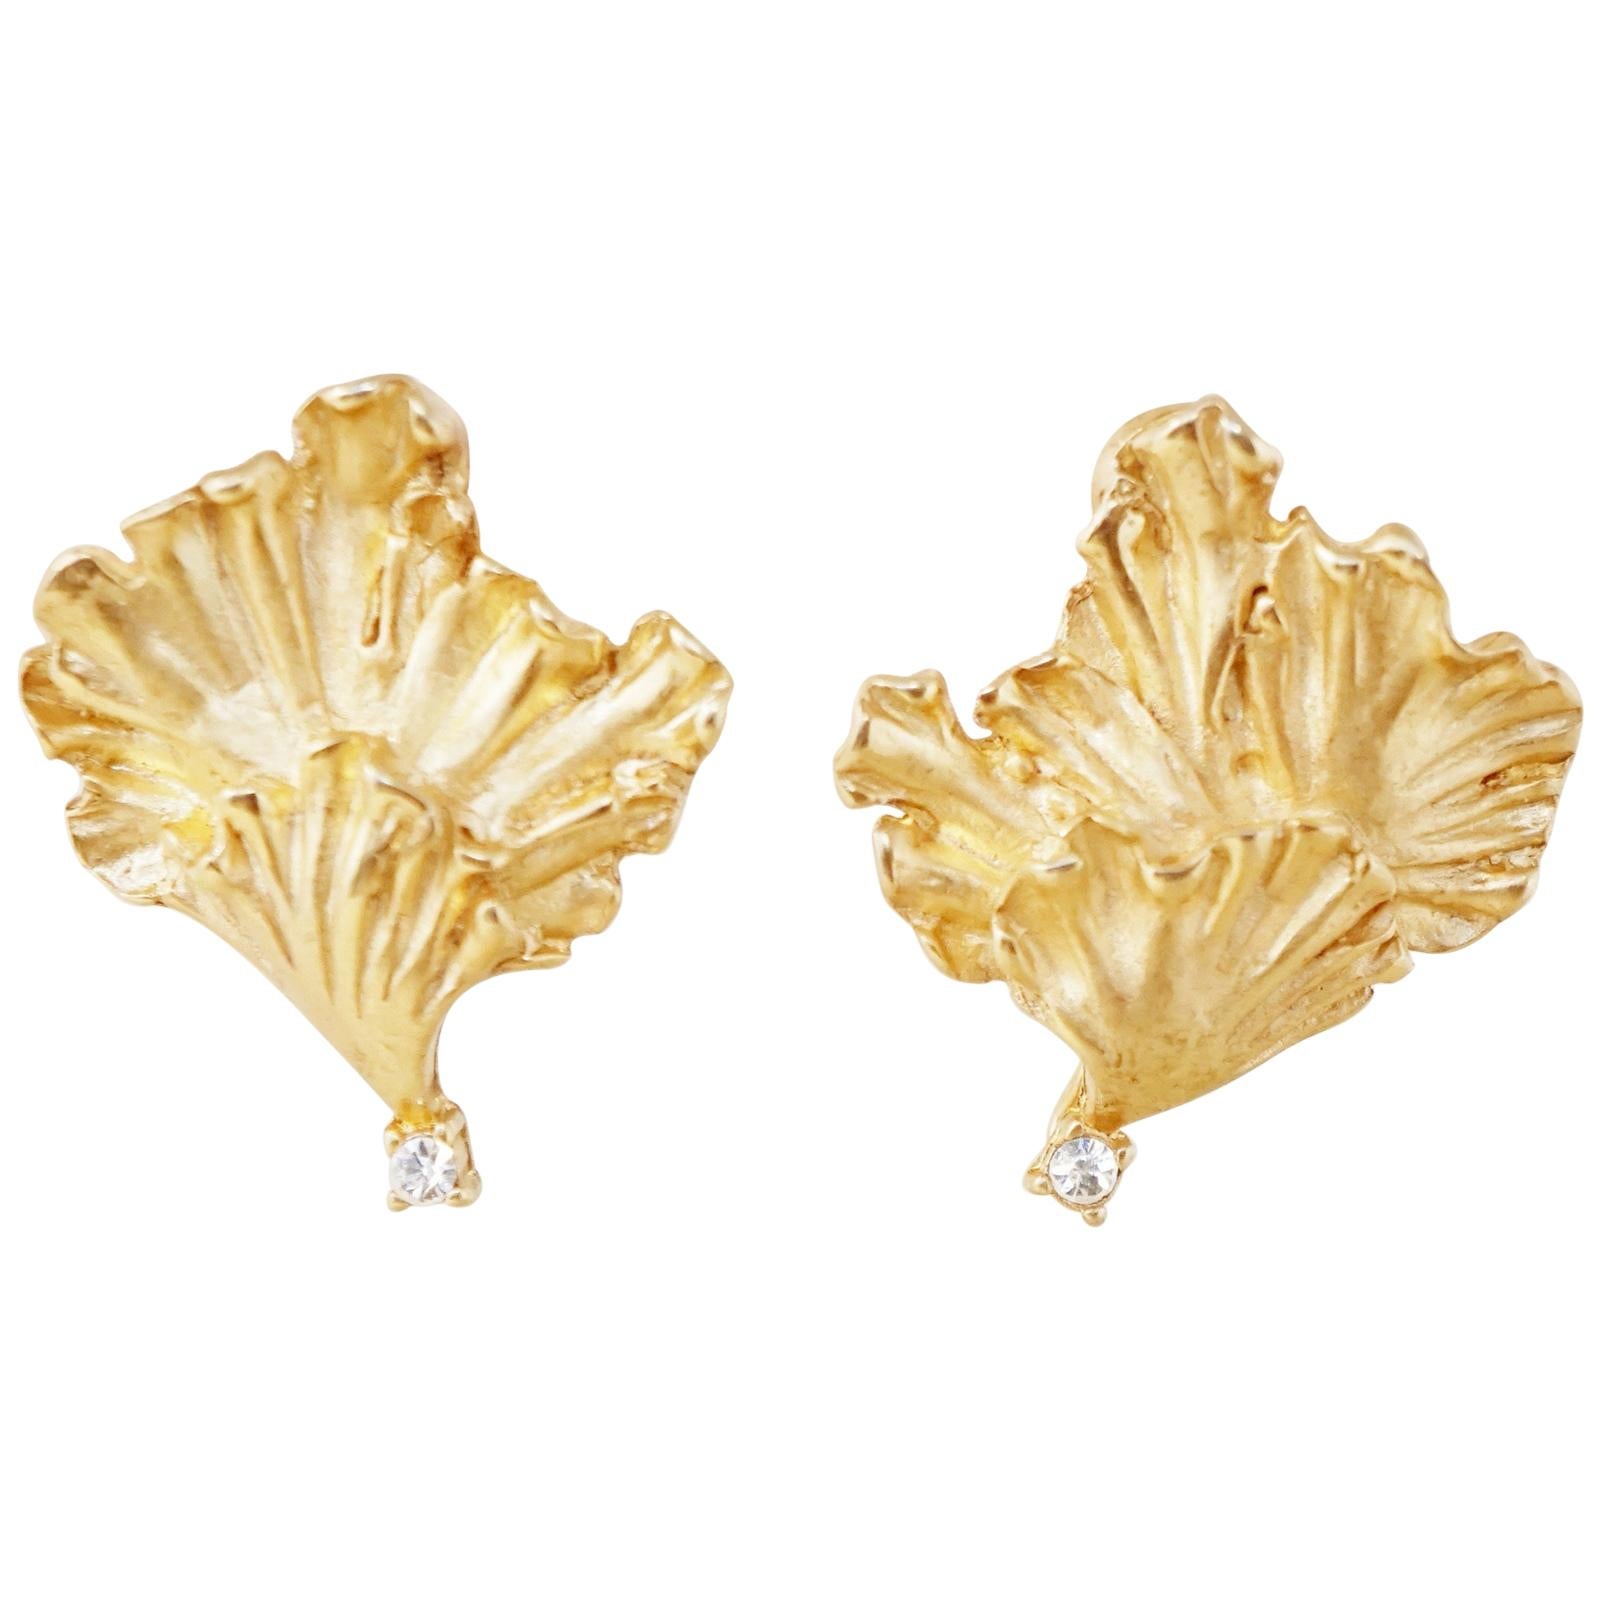 Vintage Gilded Lily Pad Earrings with Crystal Rhinestones by Erwin Pearl, 1990s